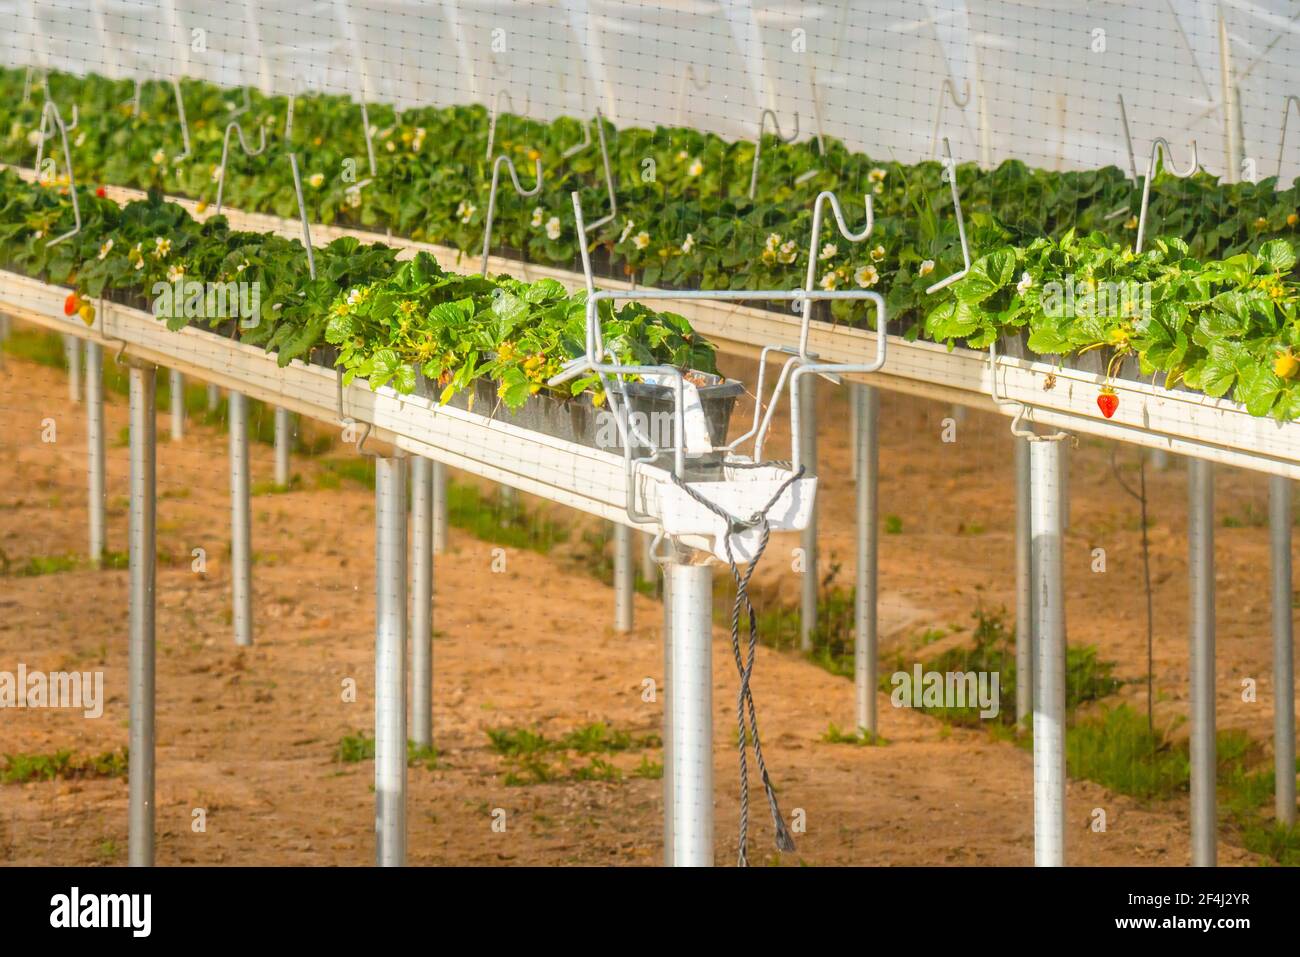 Rows of strawberry plants growing in  plant nursery. Greenhouses for strawberry plants on the field. Industry, agriculture Stock Photo